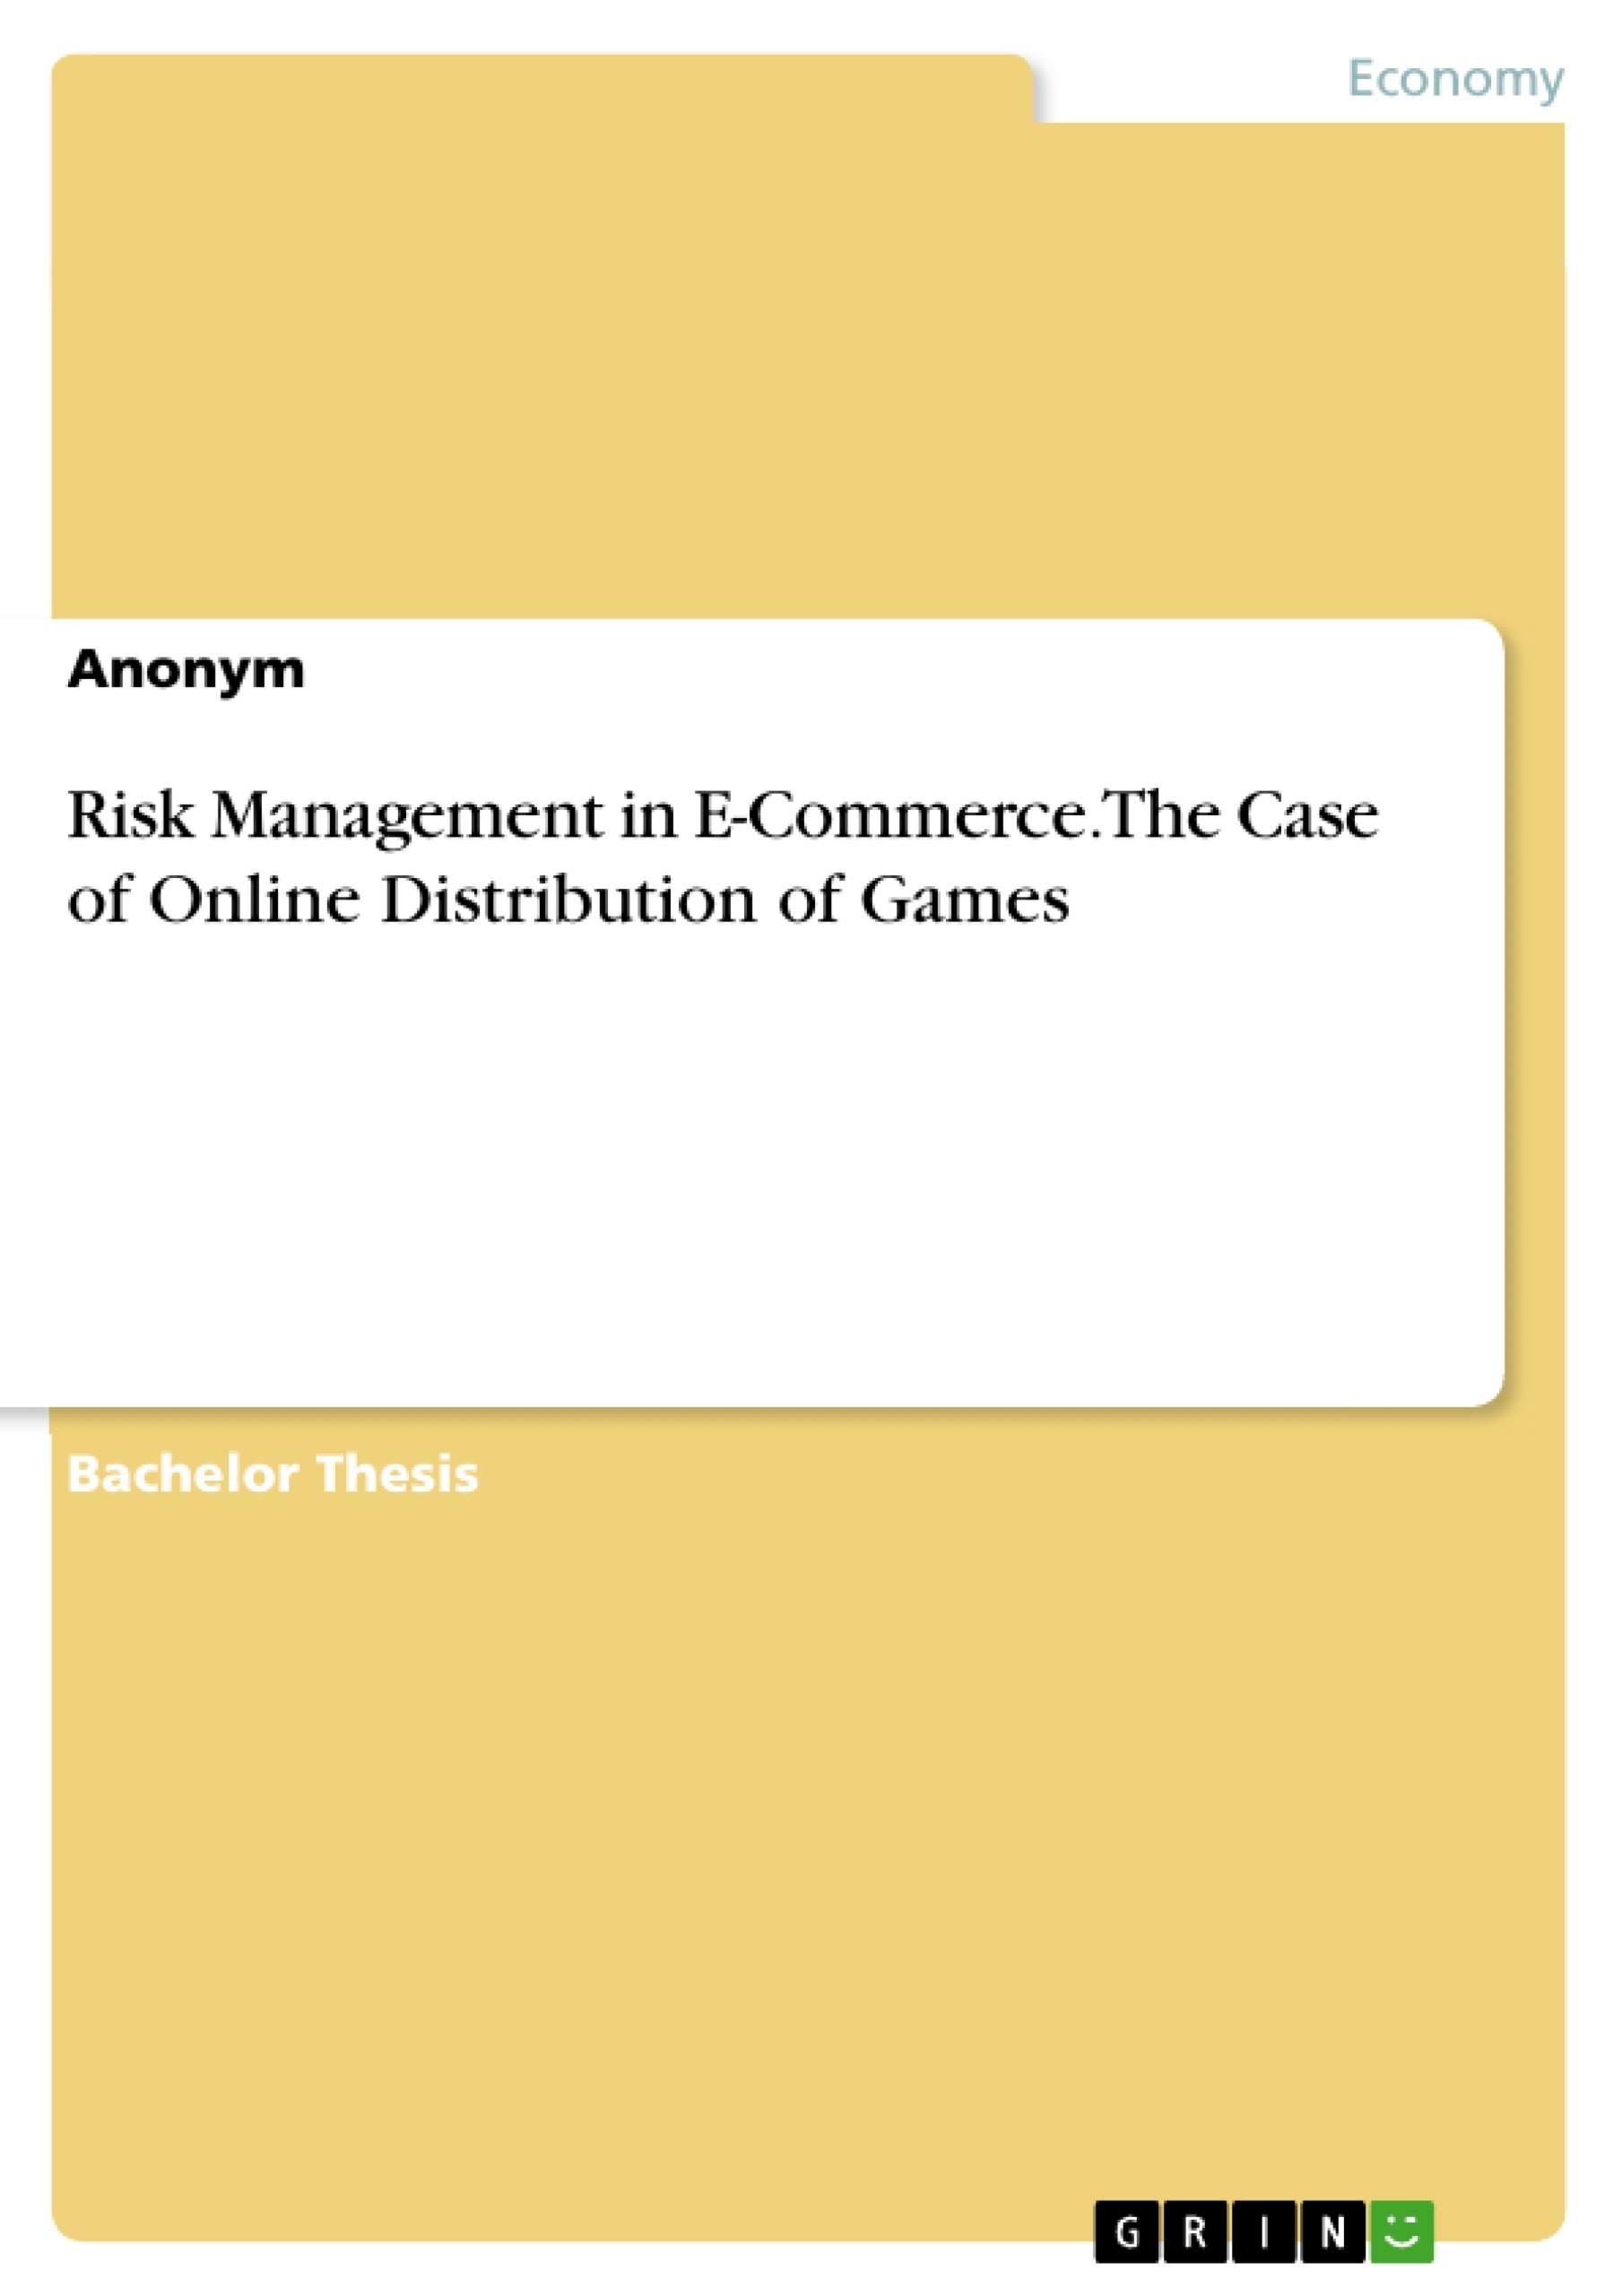 Title: Risk Management in E-Commerce. The Case of Online Distribution of Games